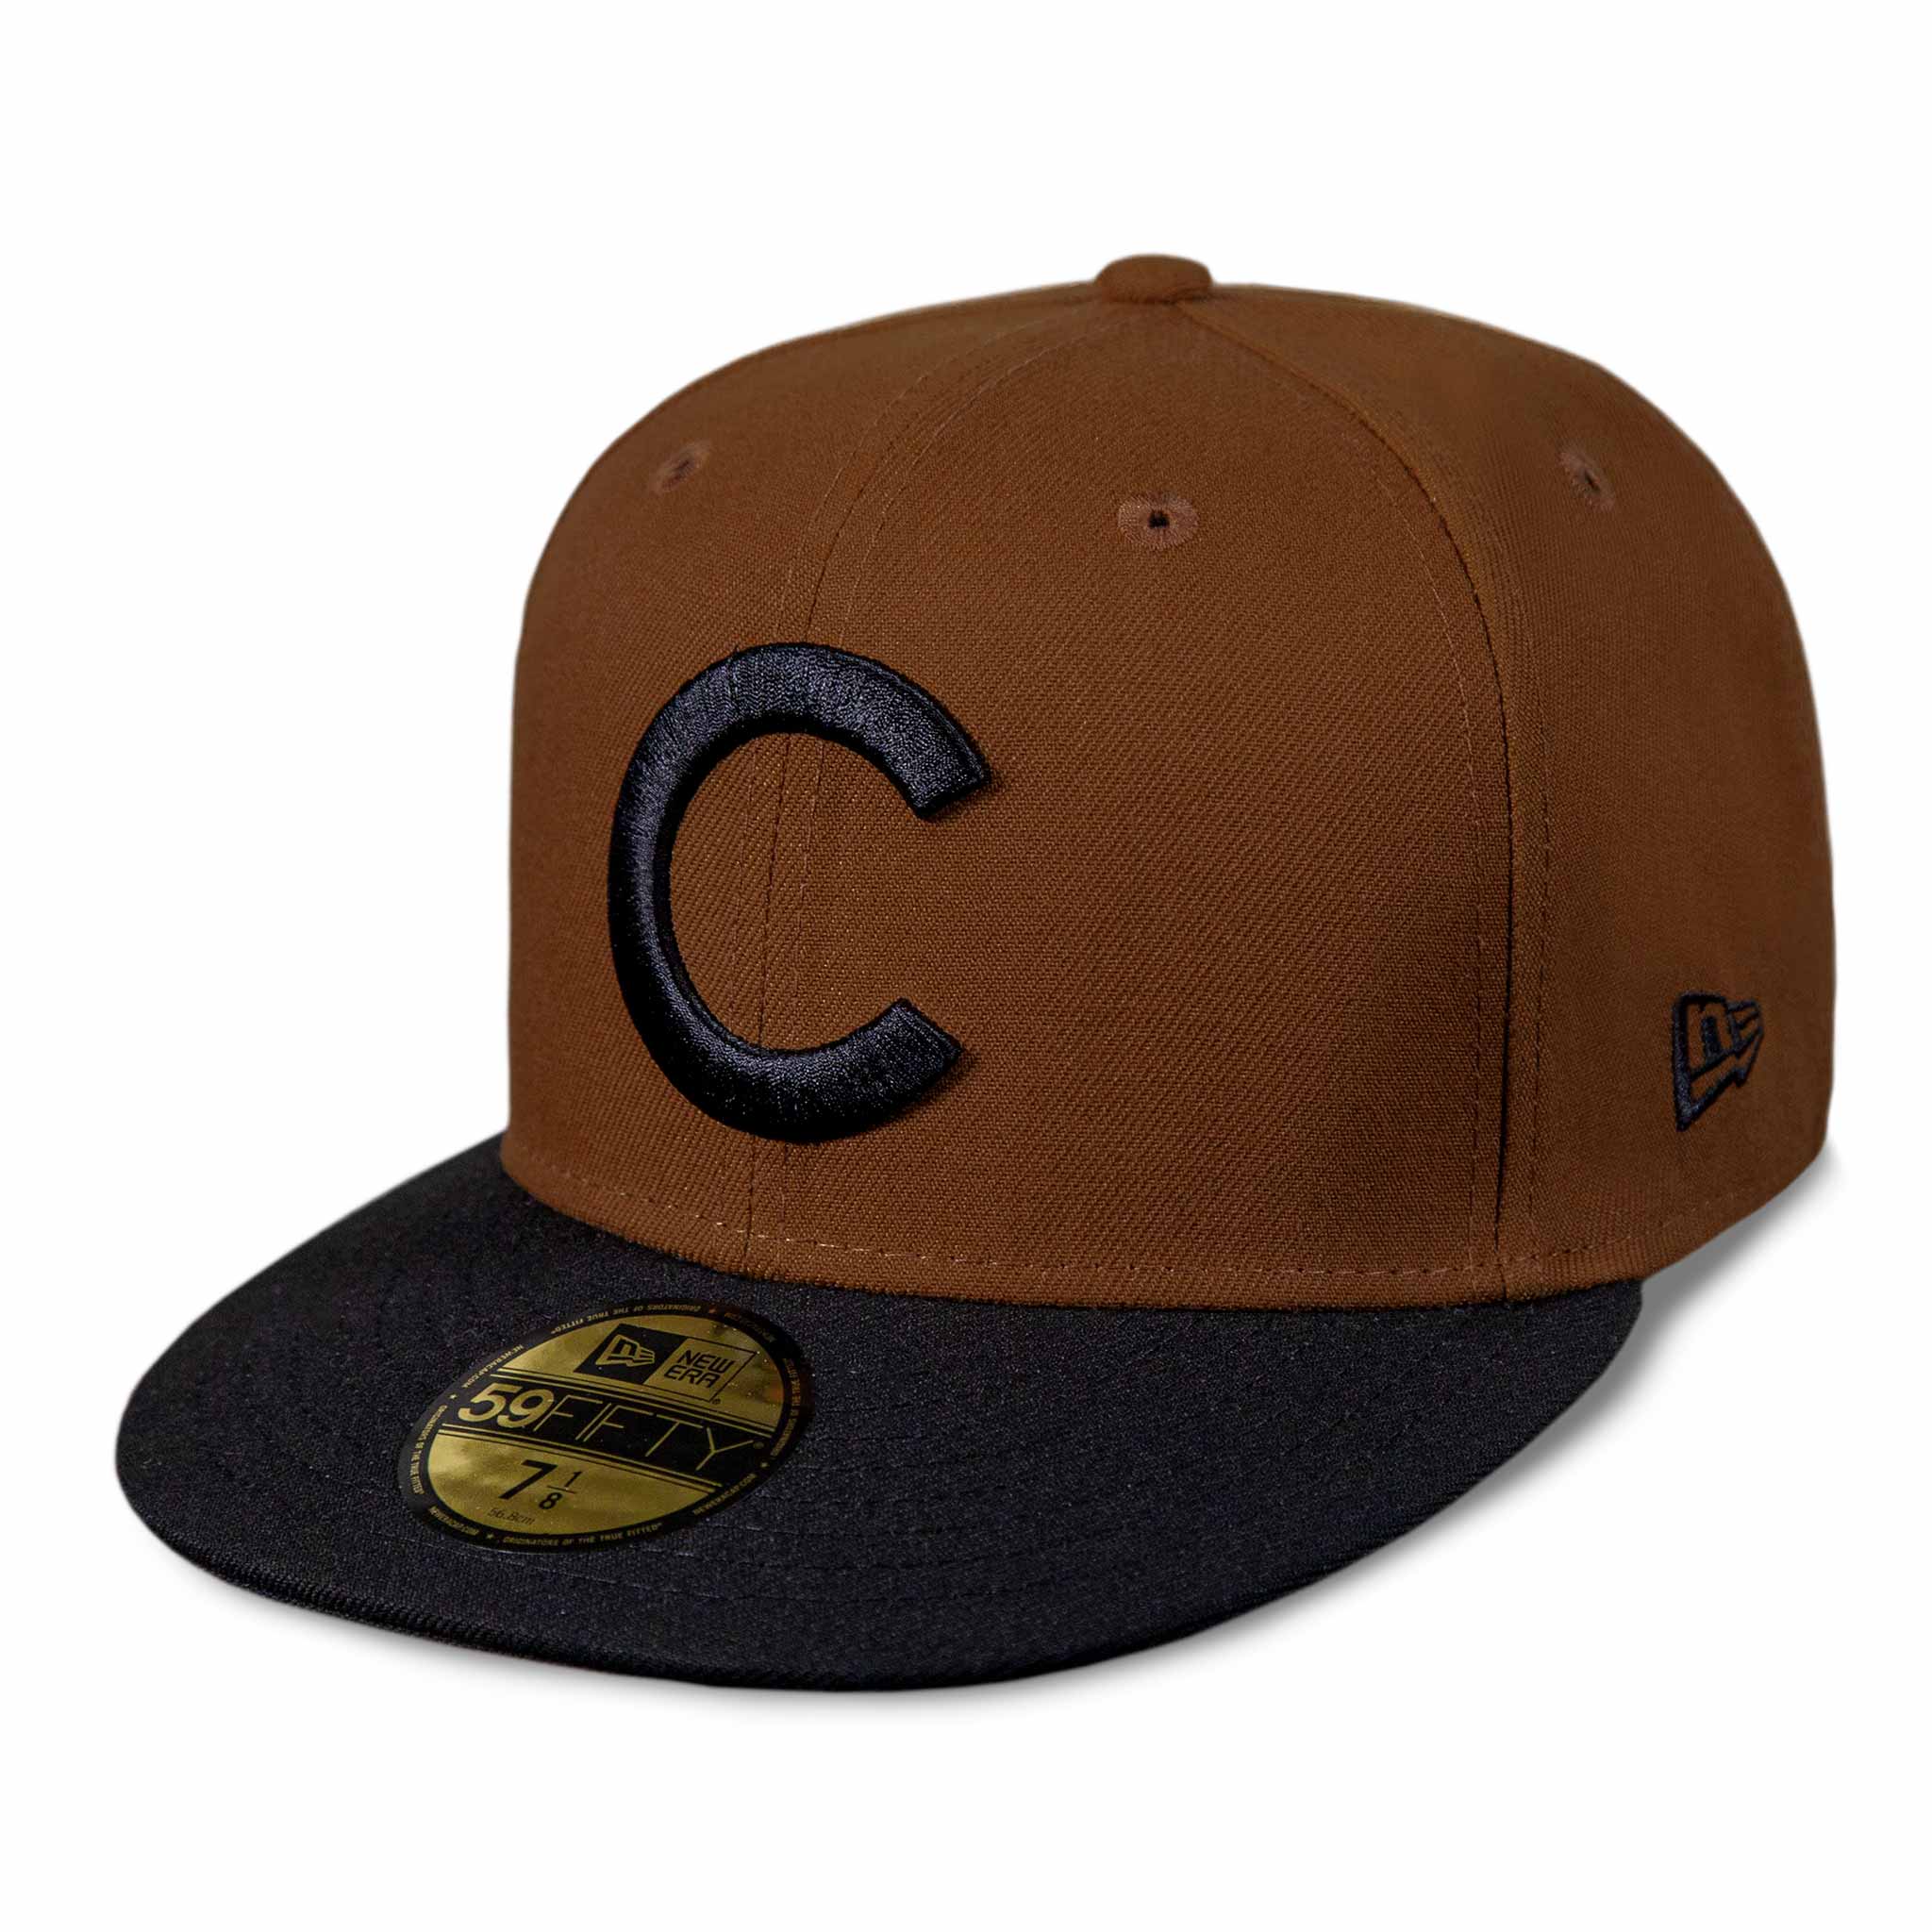 Chicago Cubs 1910 Toasted Peanut and Black 5950 Fitted Cap 6 5/8 = 53 cm